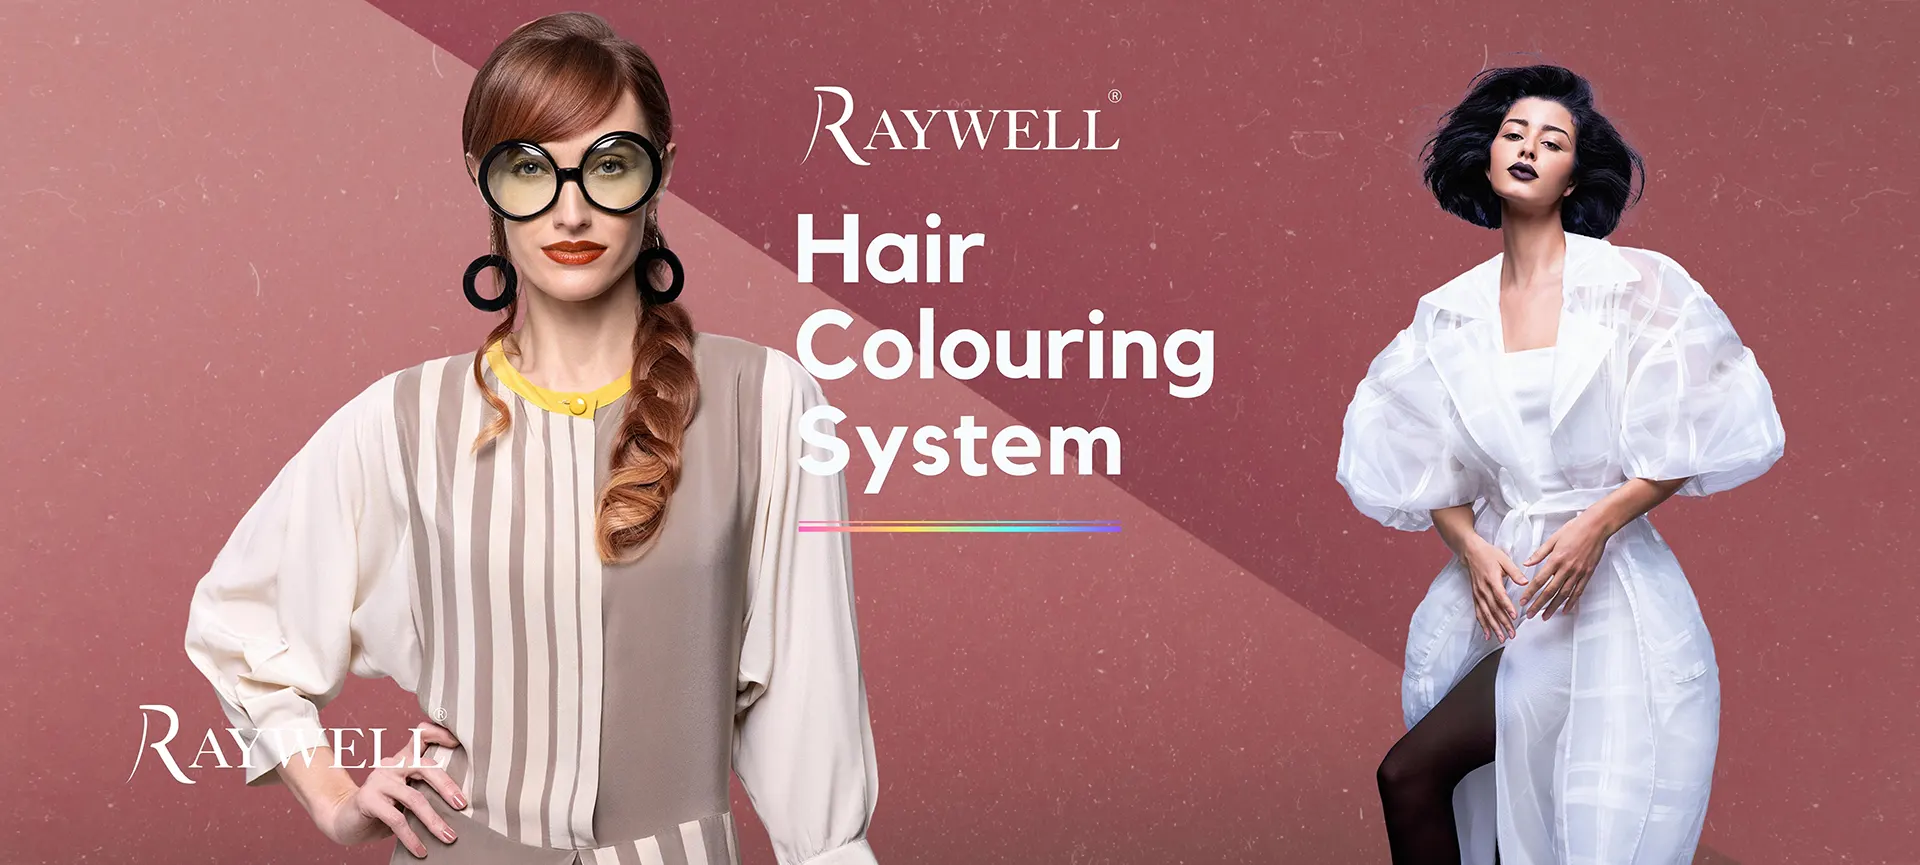 Hair colouring System